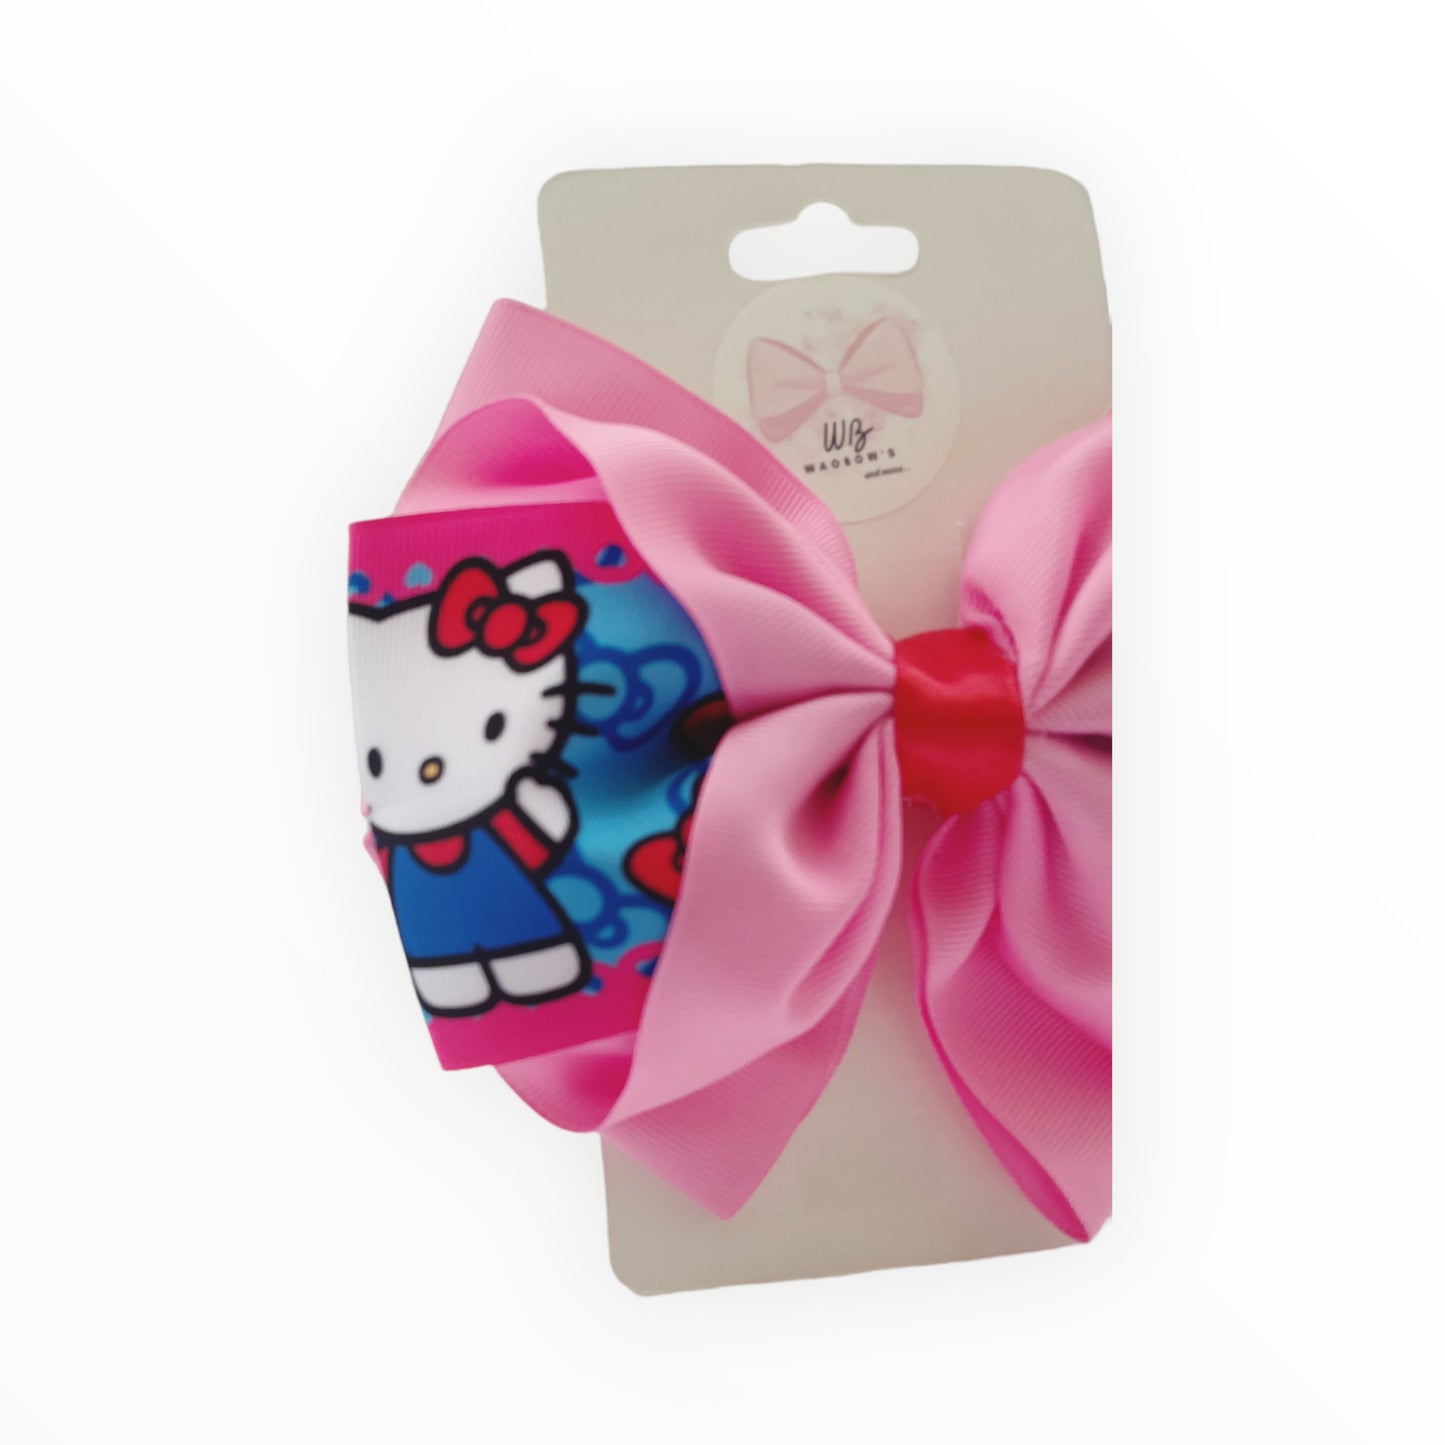 Backpack and bow Hello Kitty Bundle